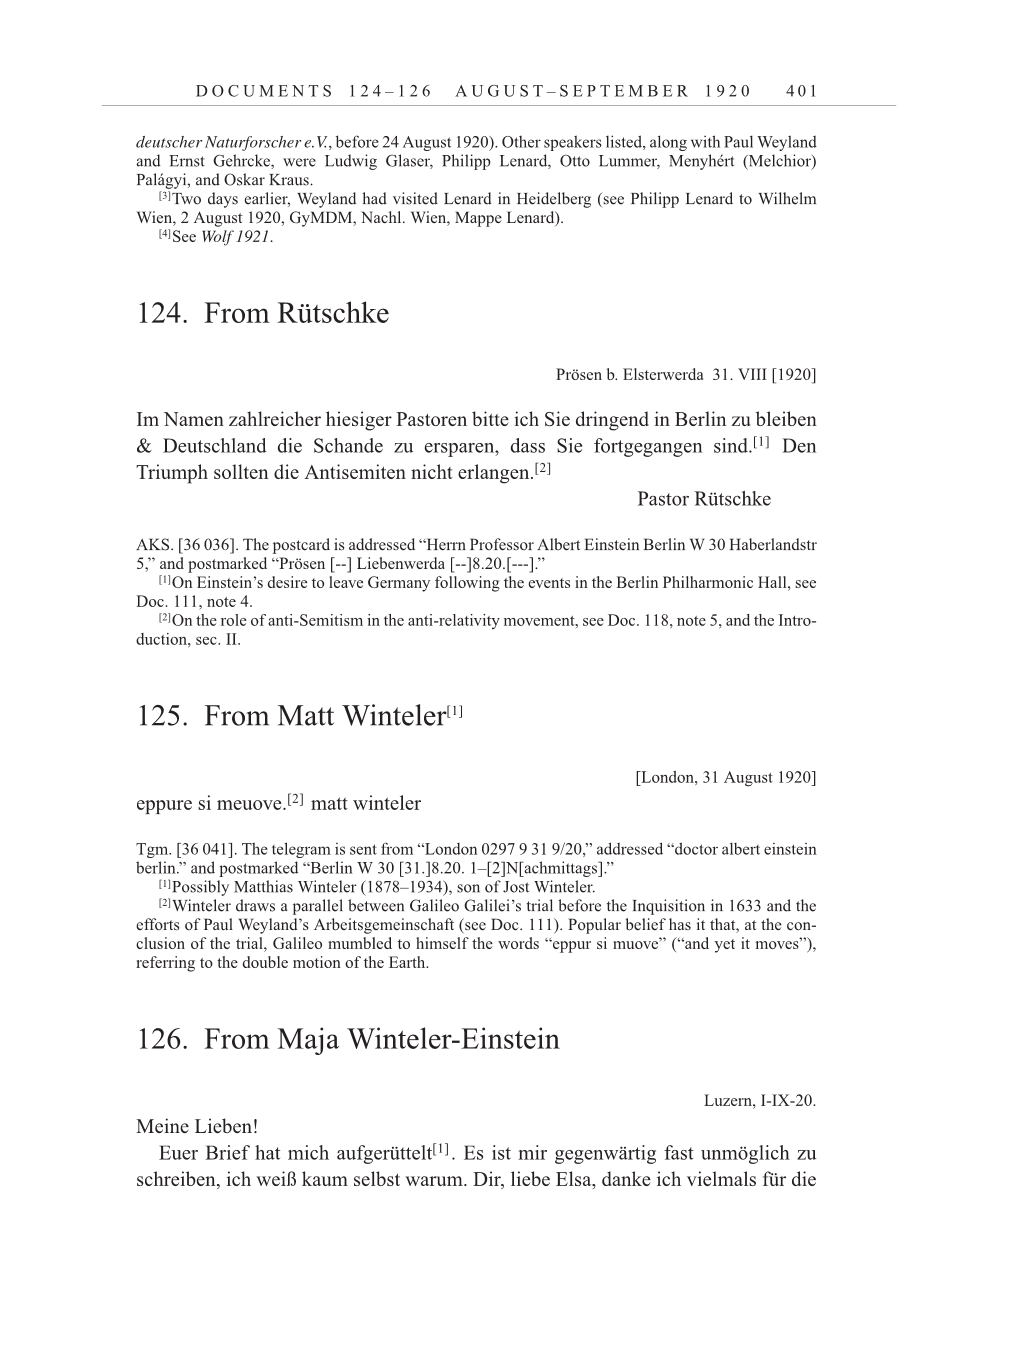 Volume 10: The Berlin Years: Correspondence May-December 1920 / Supplementary Correspondence 1909-1920 page 401